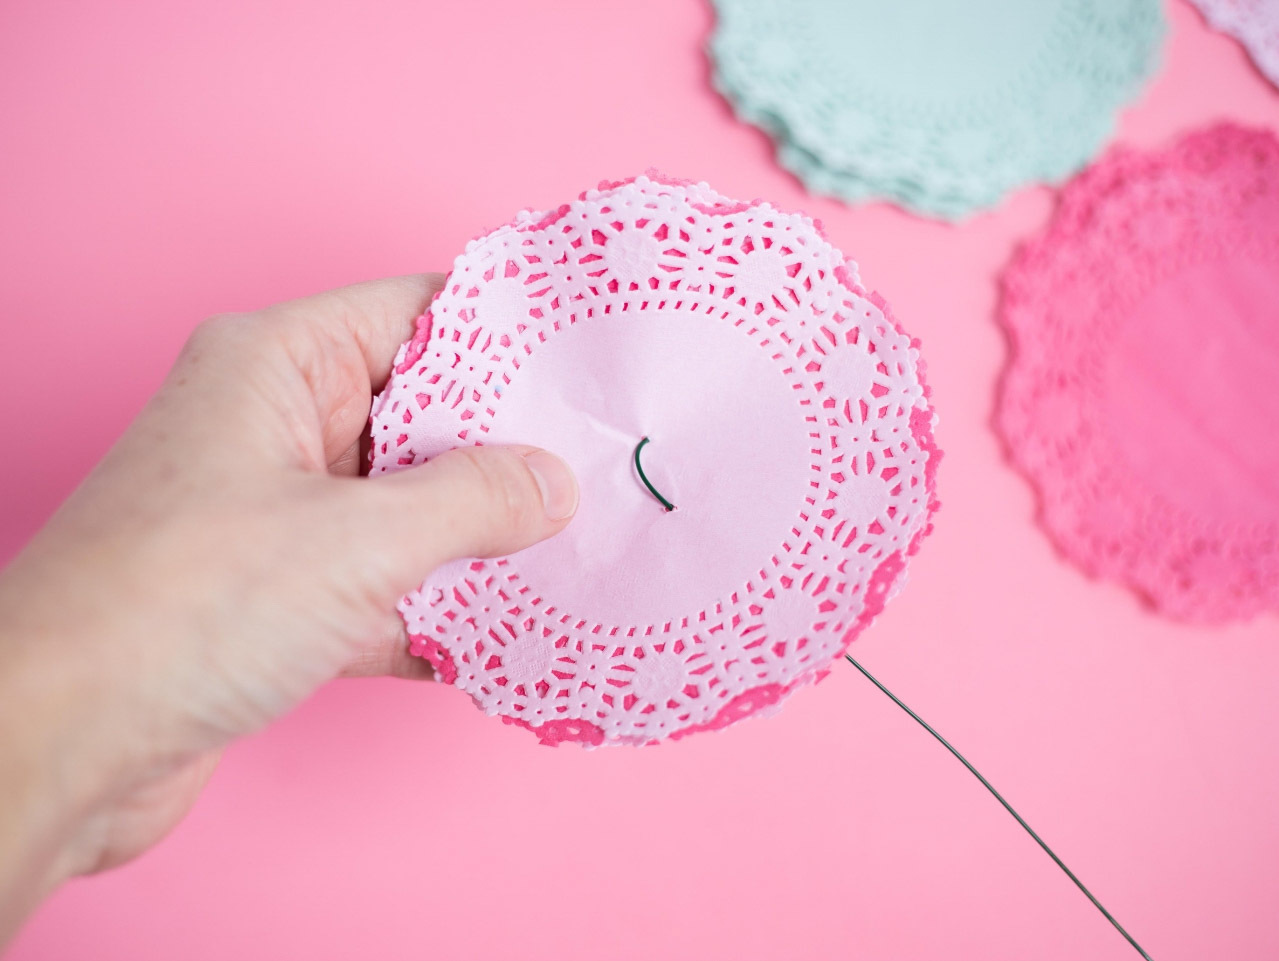 Five Crafts to Make with Paper Doilies